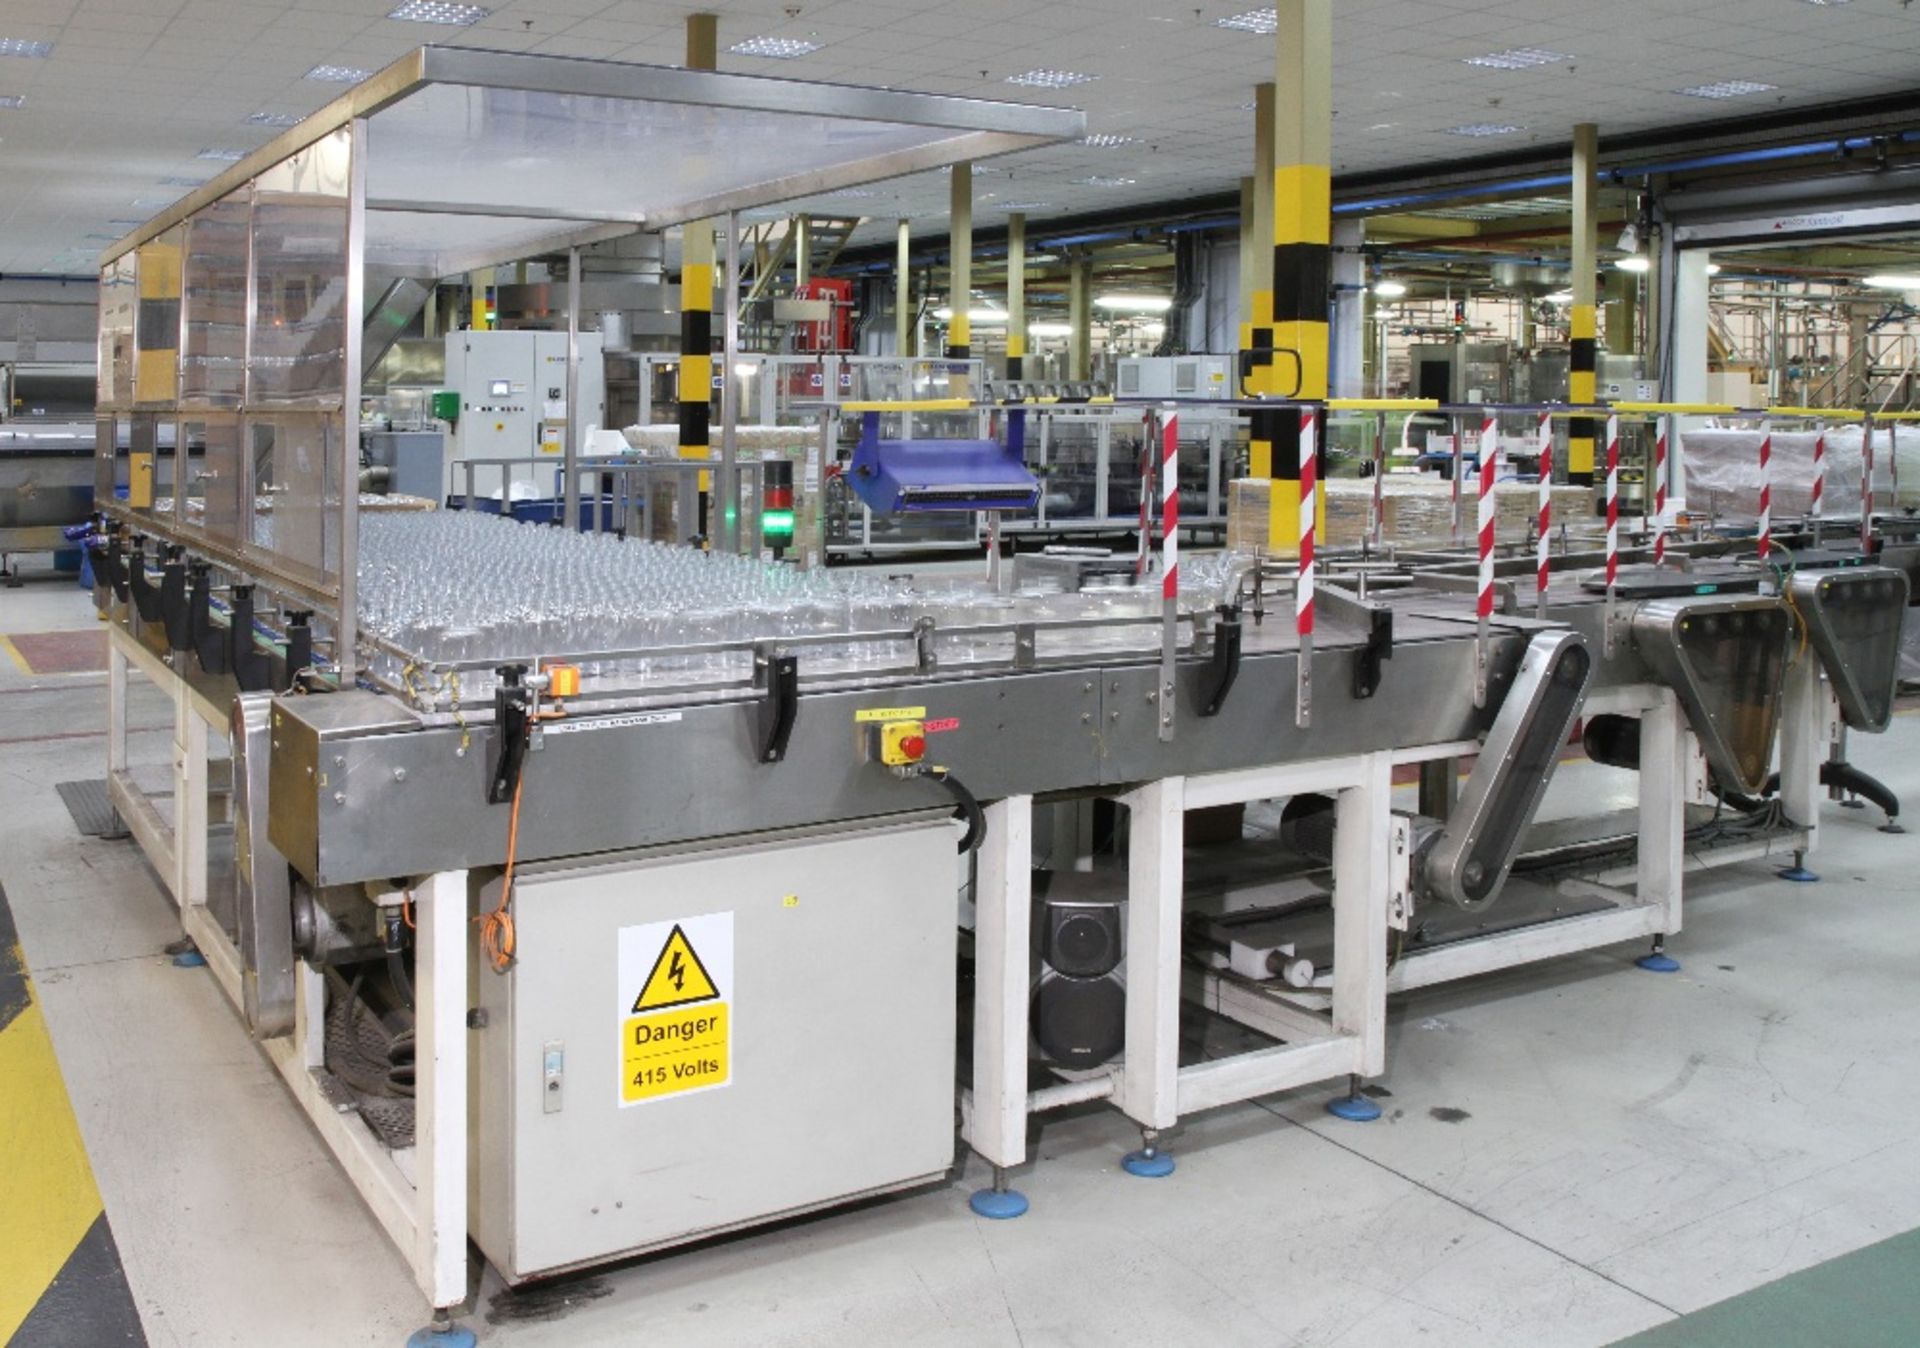 Contents Of World Class Manufacturer's Bottling Line. - Image 2 of 87